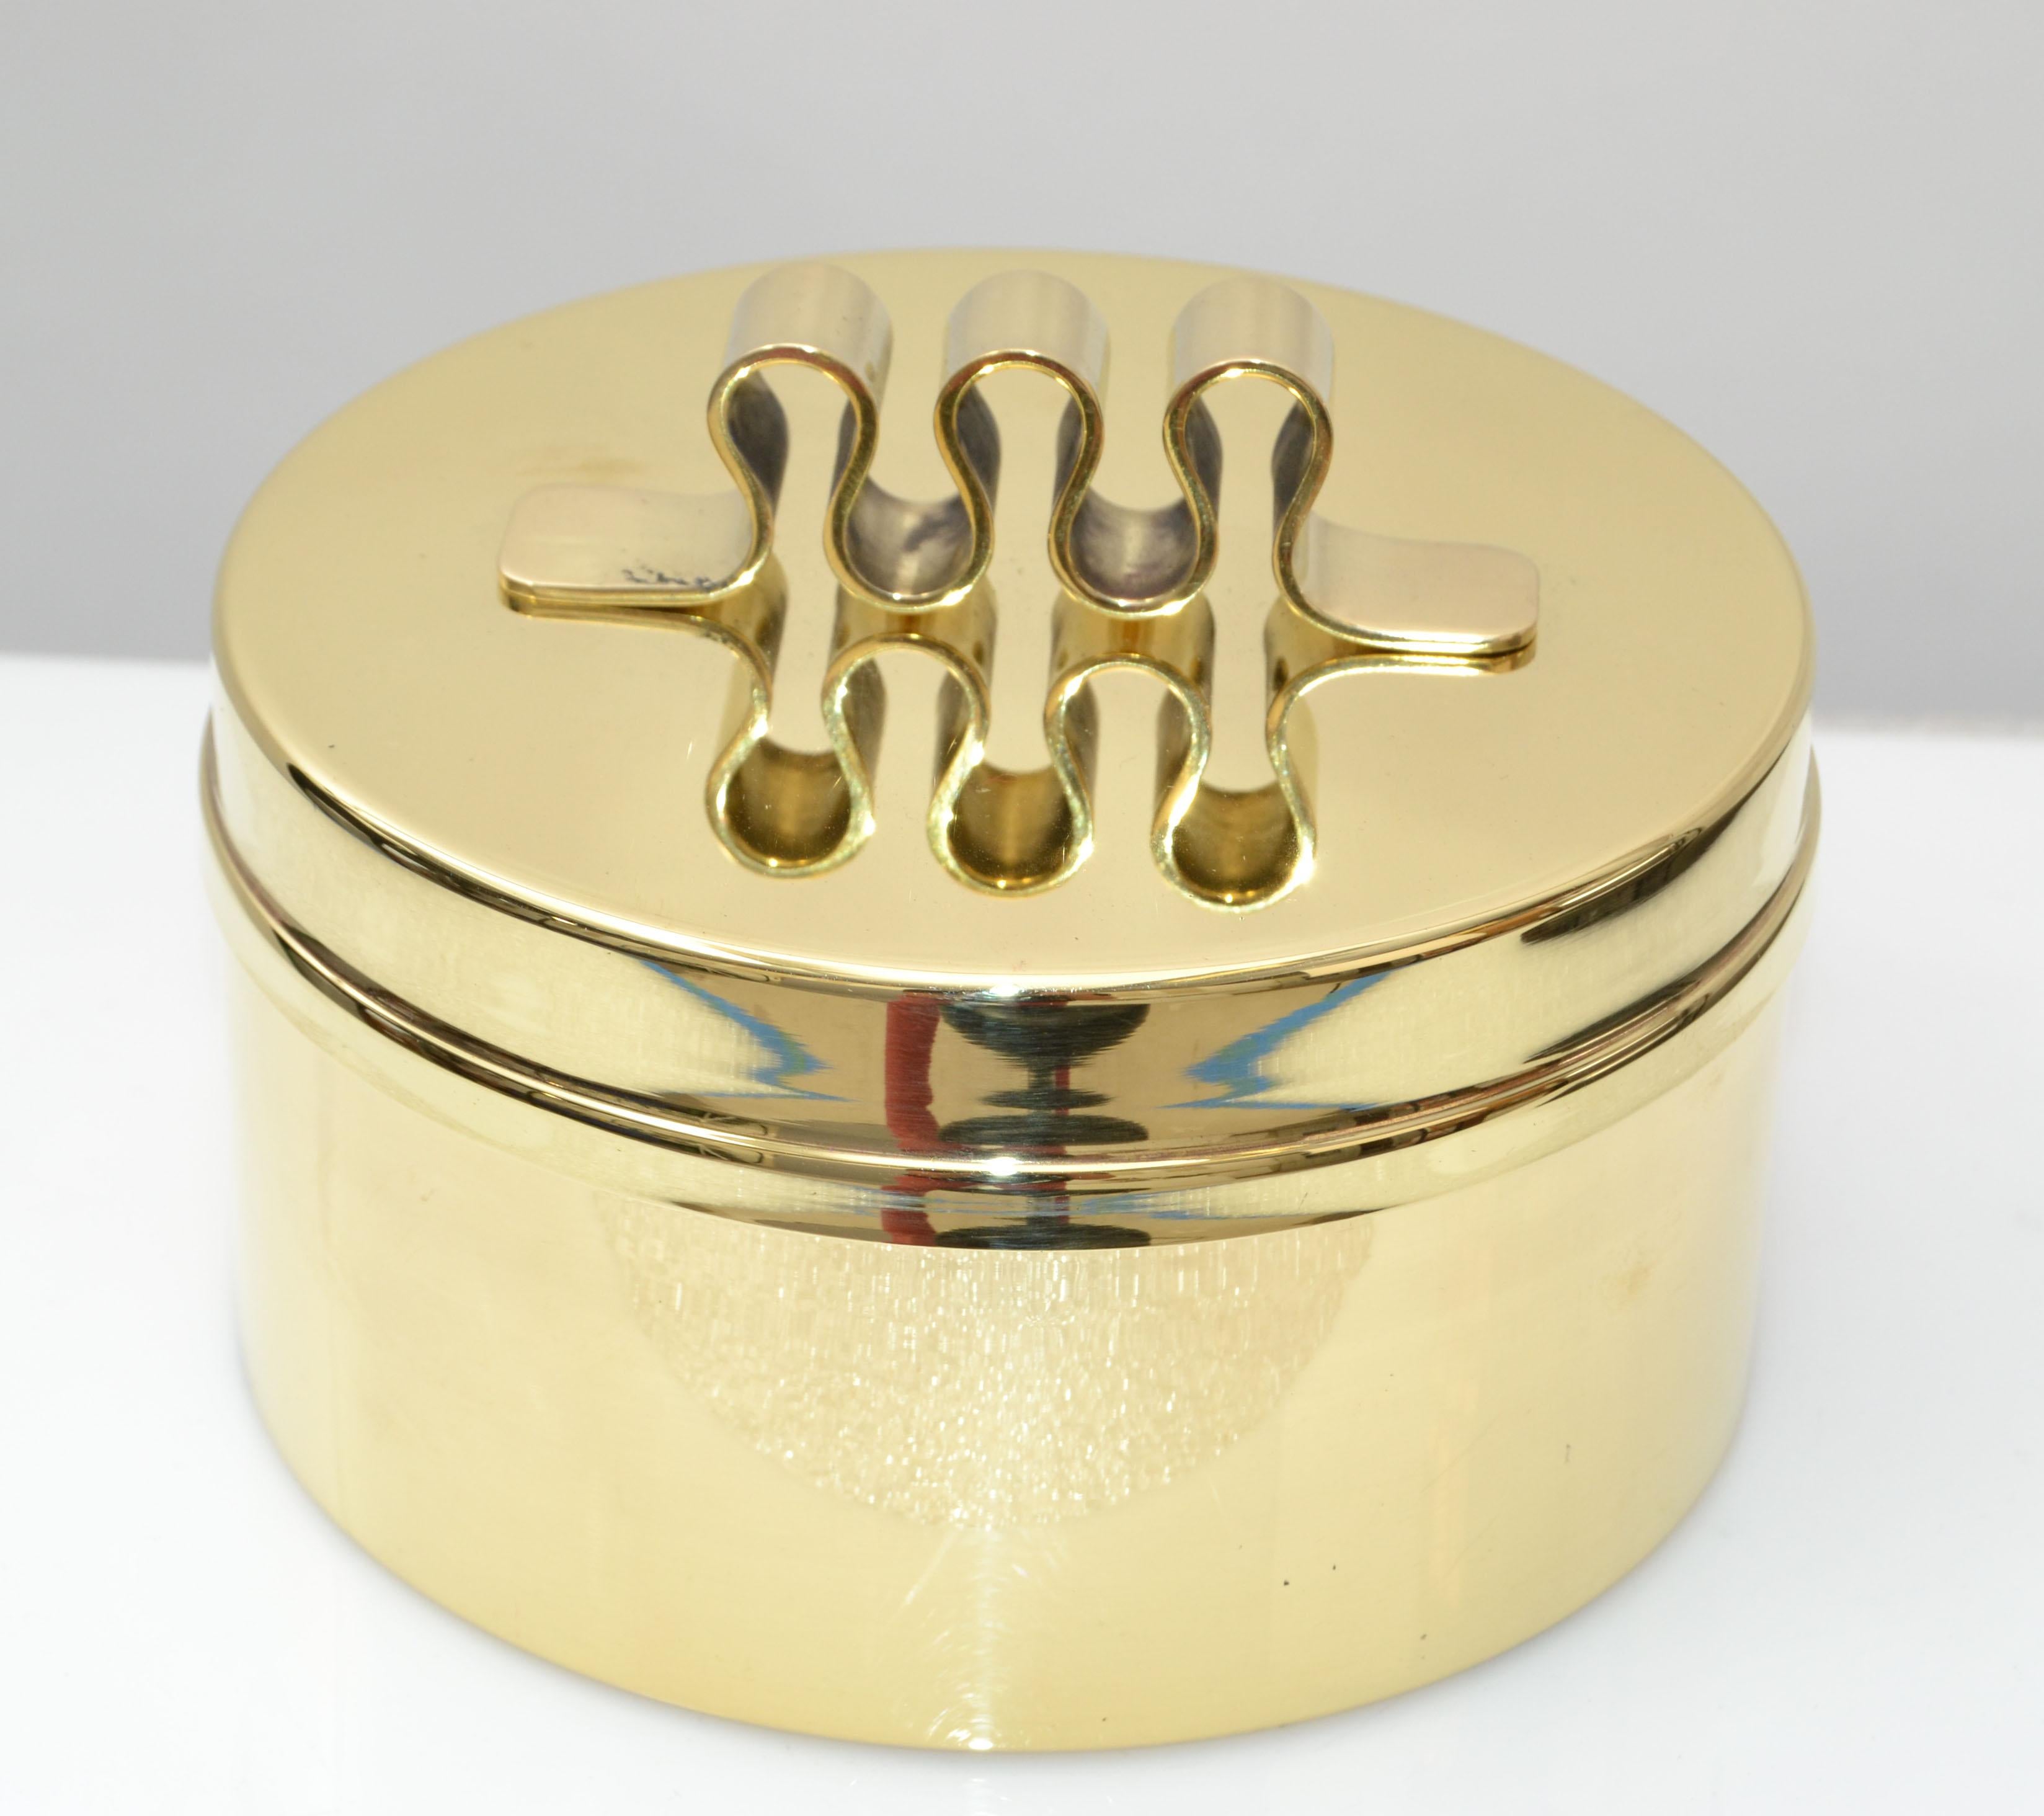 Polished Brass lidded Box, Case, Keepsake with decorative Handle.
Mid-Century Modern Design from the 1970s.